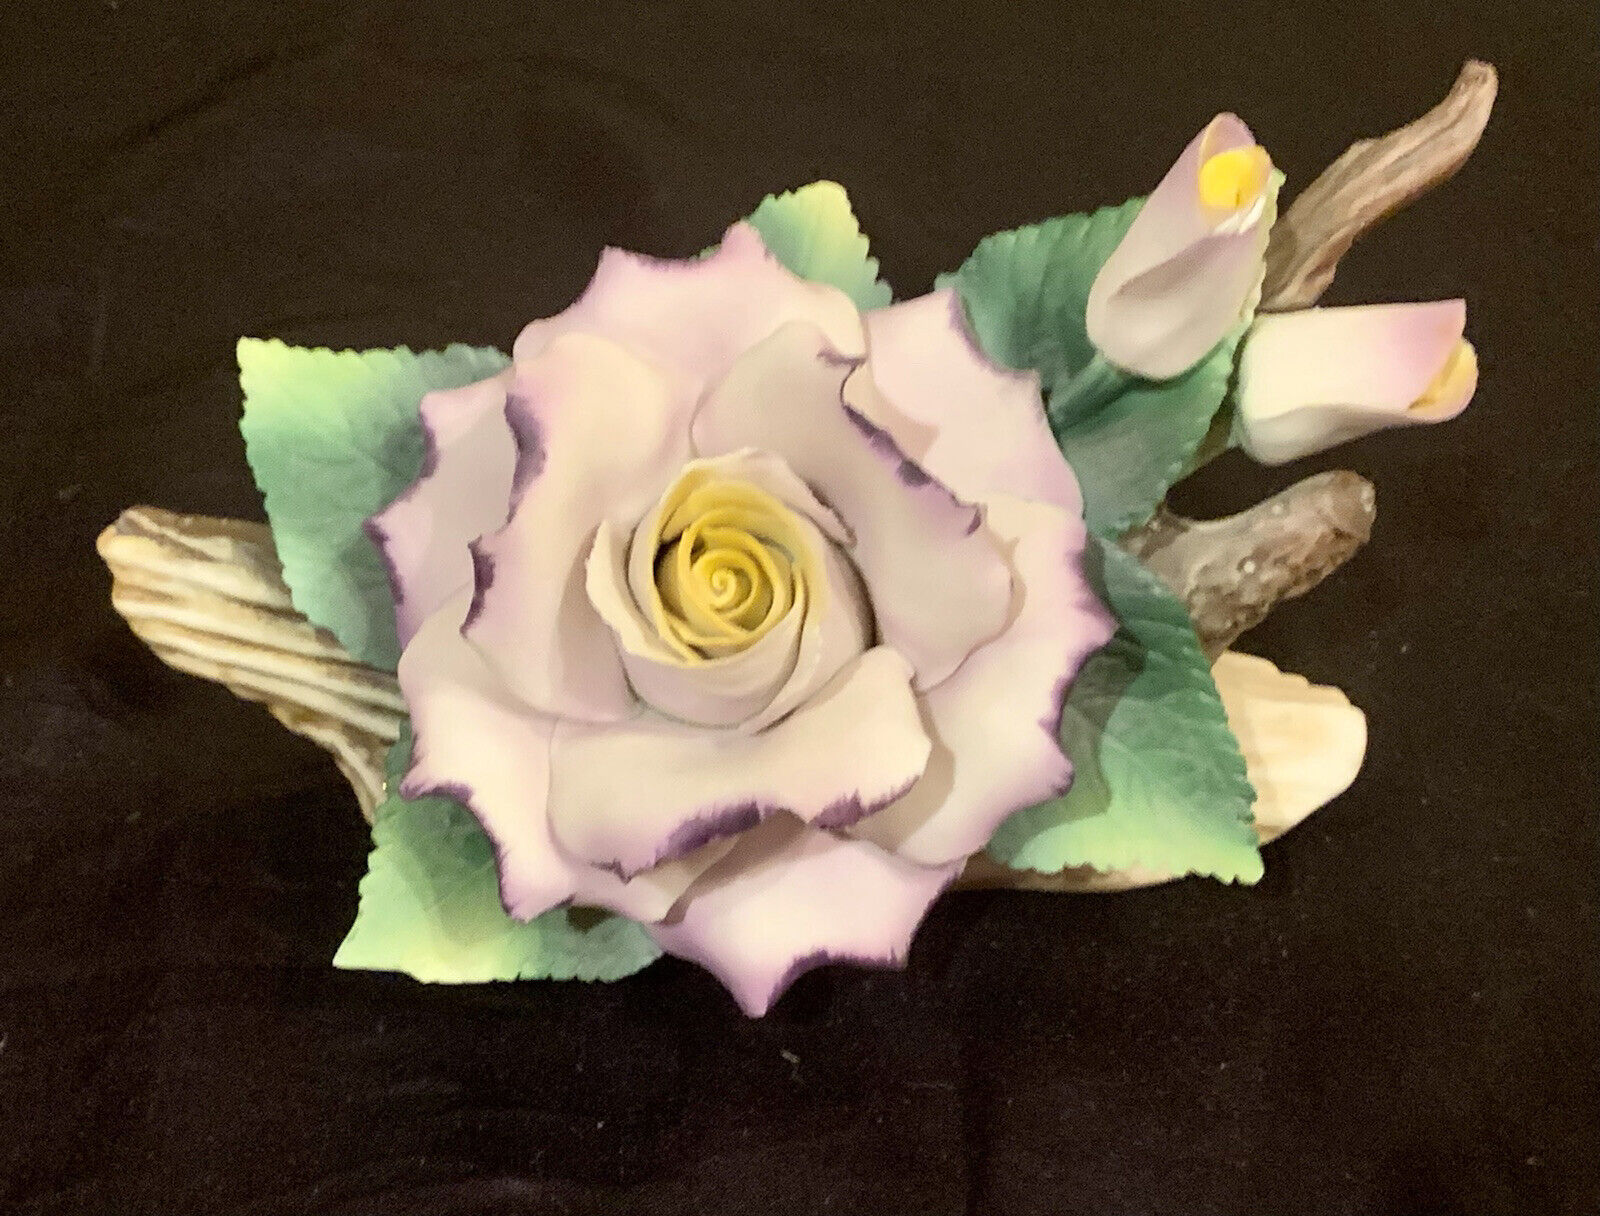 Capodimonte Napoleon, Large Purple Rose & 2 rose buds arranged on a branch